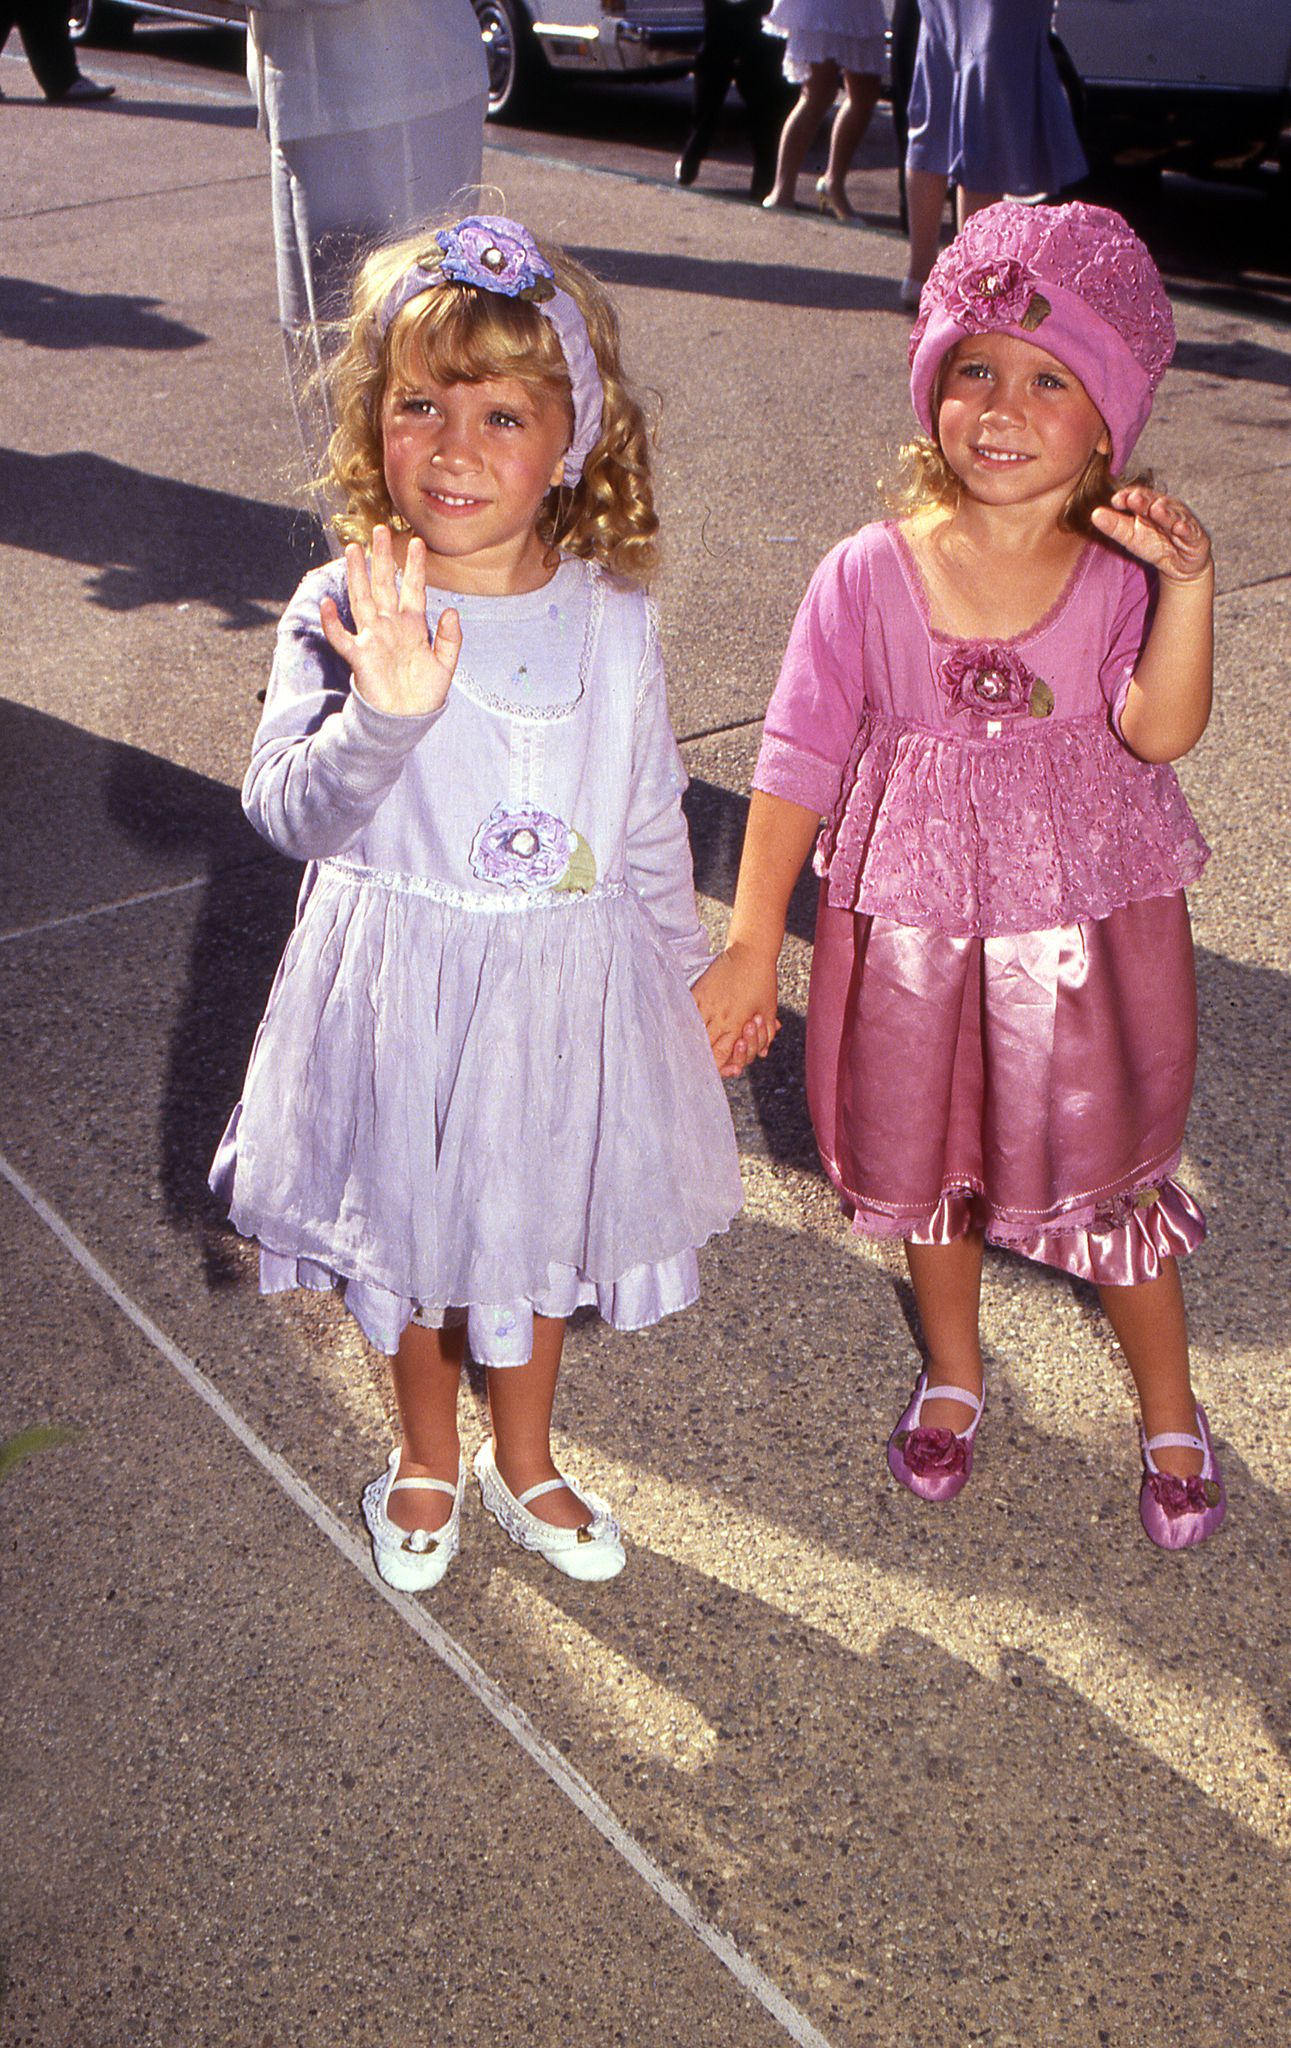 circa 1990 - Mary Kate and Ashley Olsen arriving at a celebrity event | Shutterstock